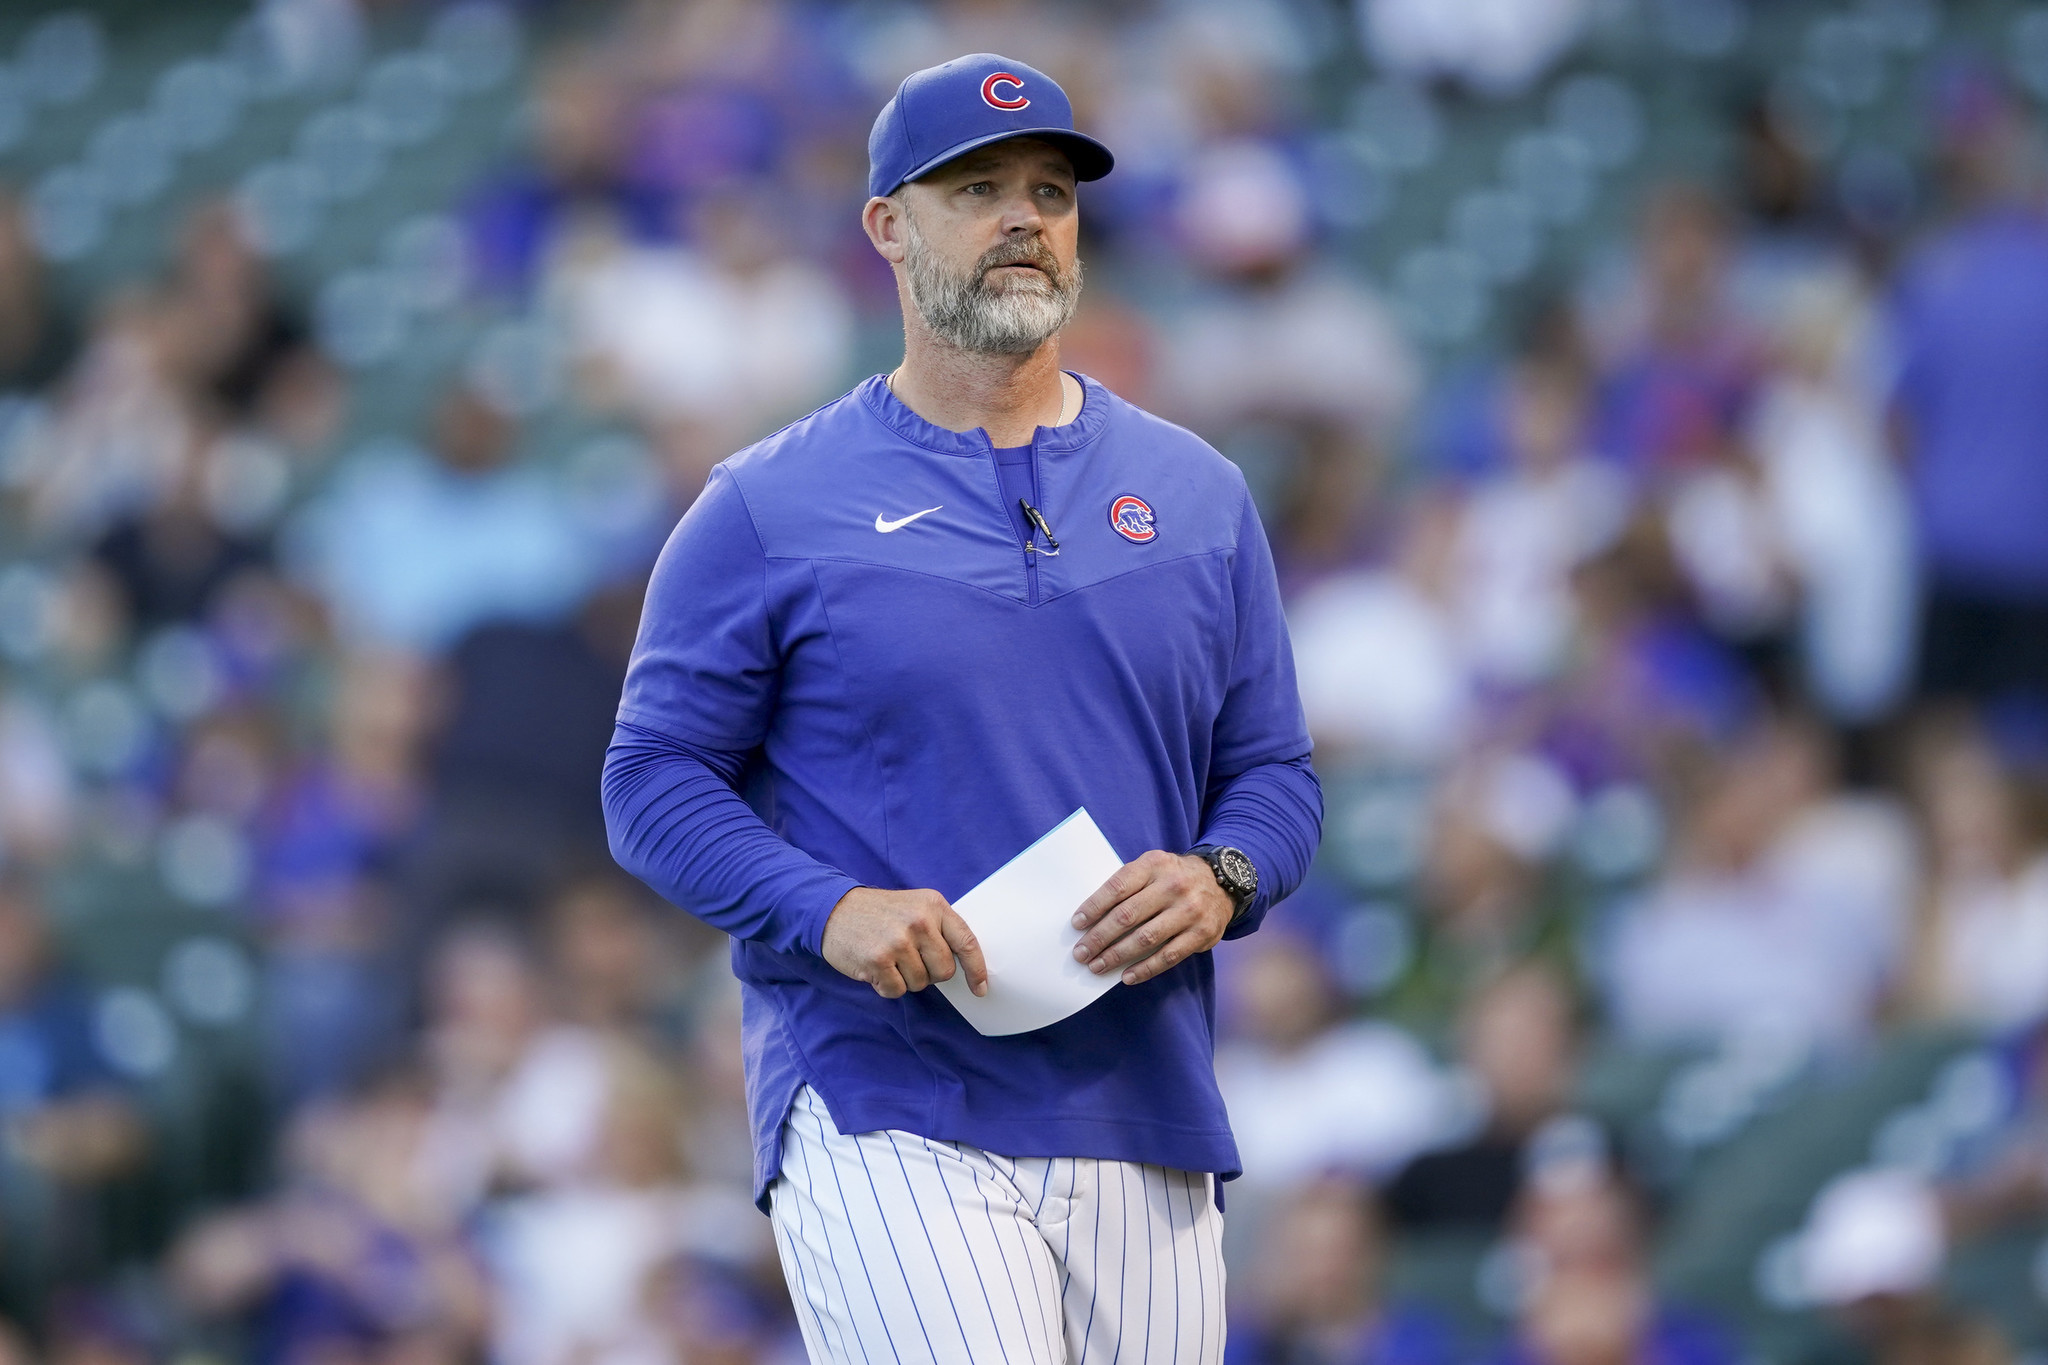 Cubs' David Ross gearing up after offseason of fun, family and free agents  - Chicago Sun-Times